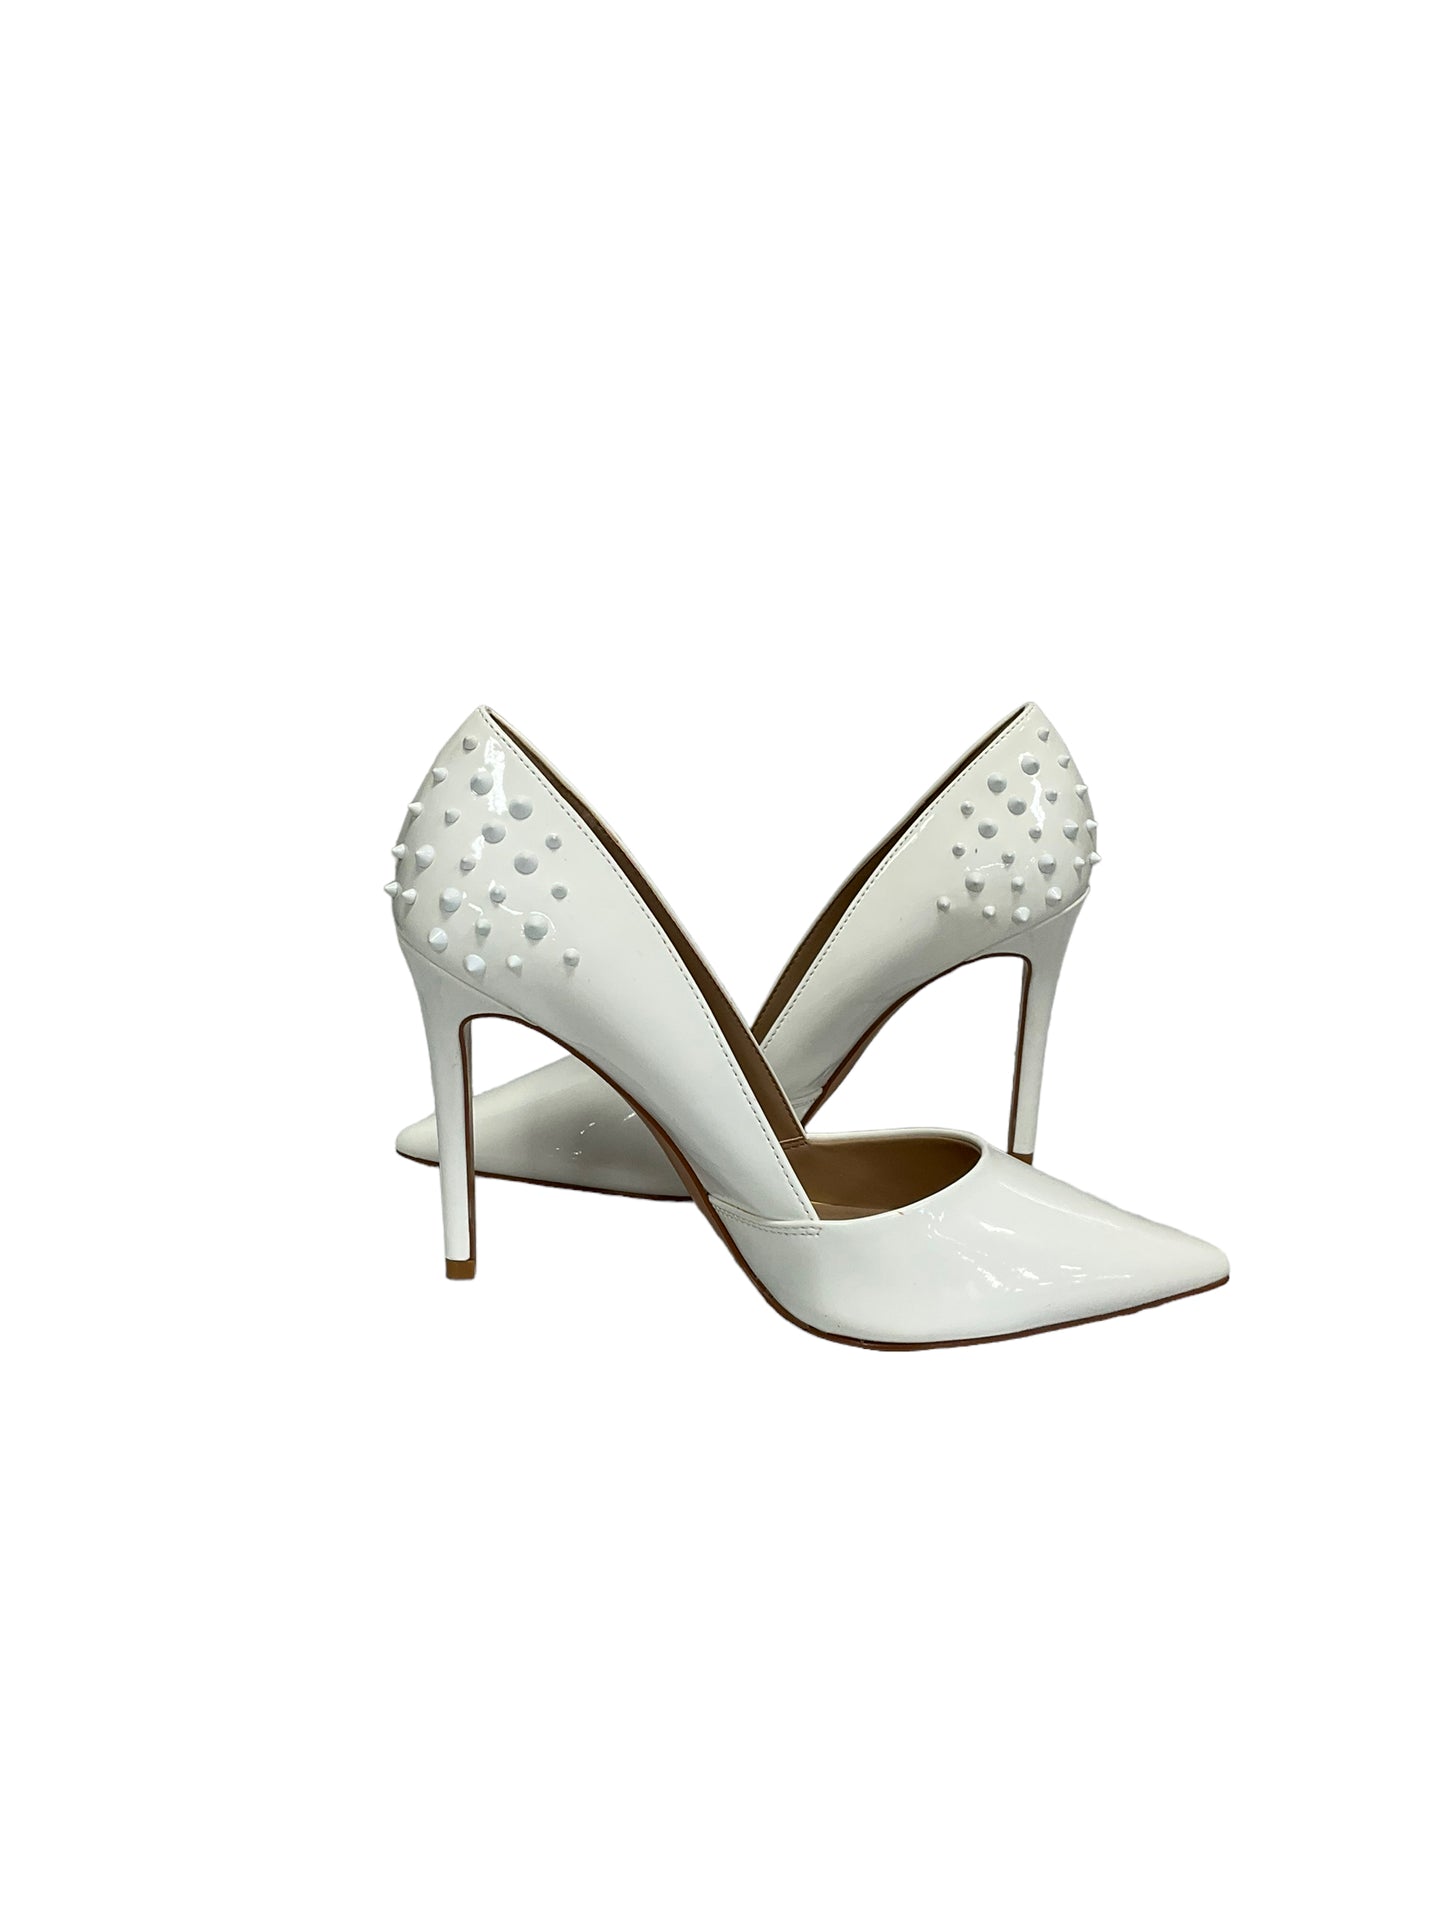 Shoes Heels Stiletto By Mix No 6  Size: 8